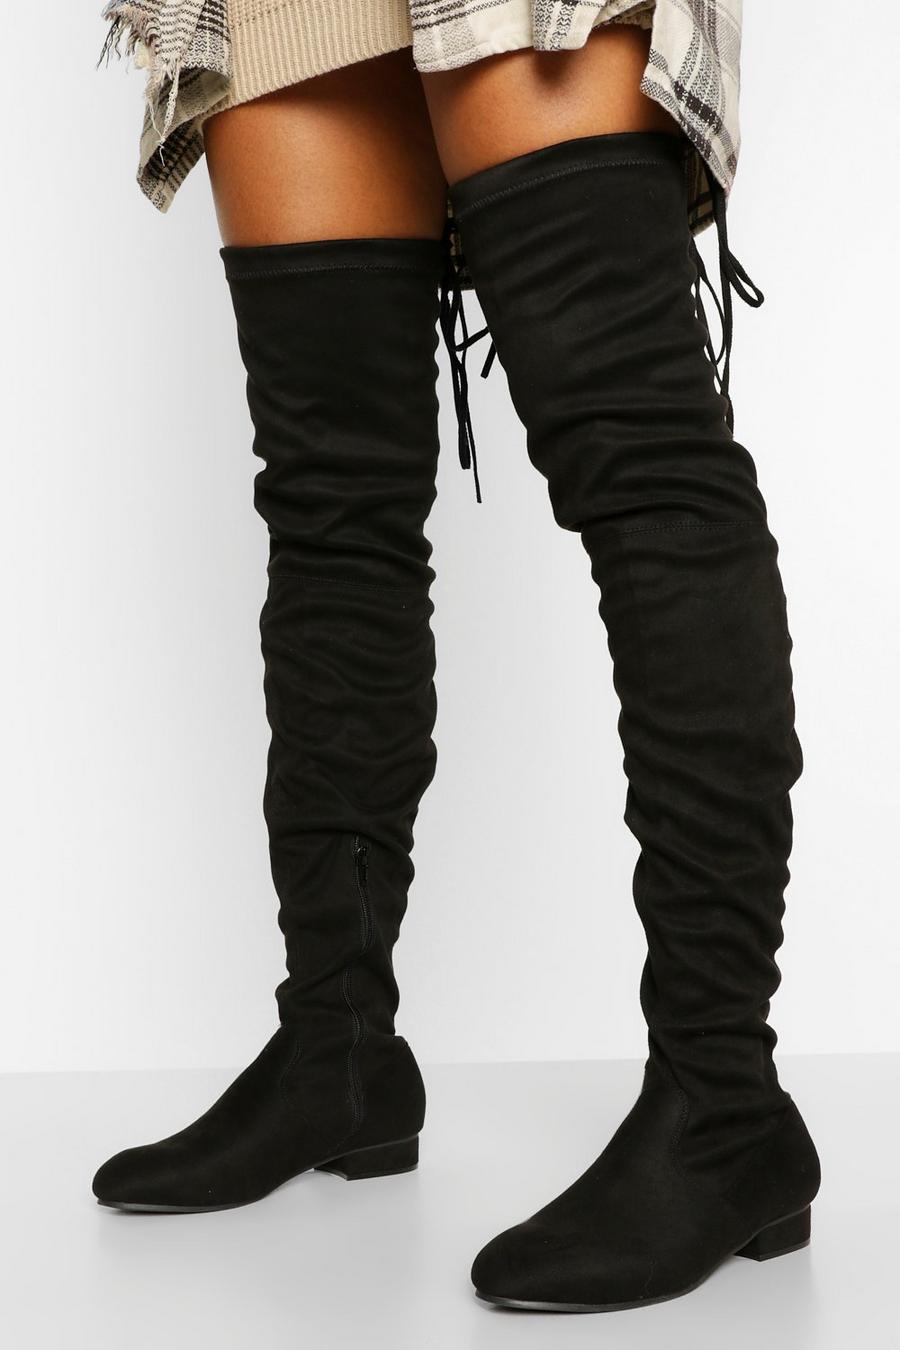 Black Wider Calf Over The Knee Boot